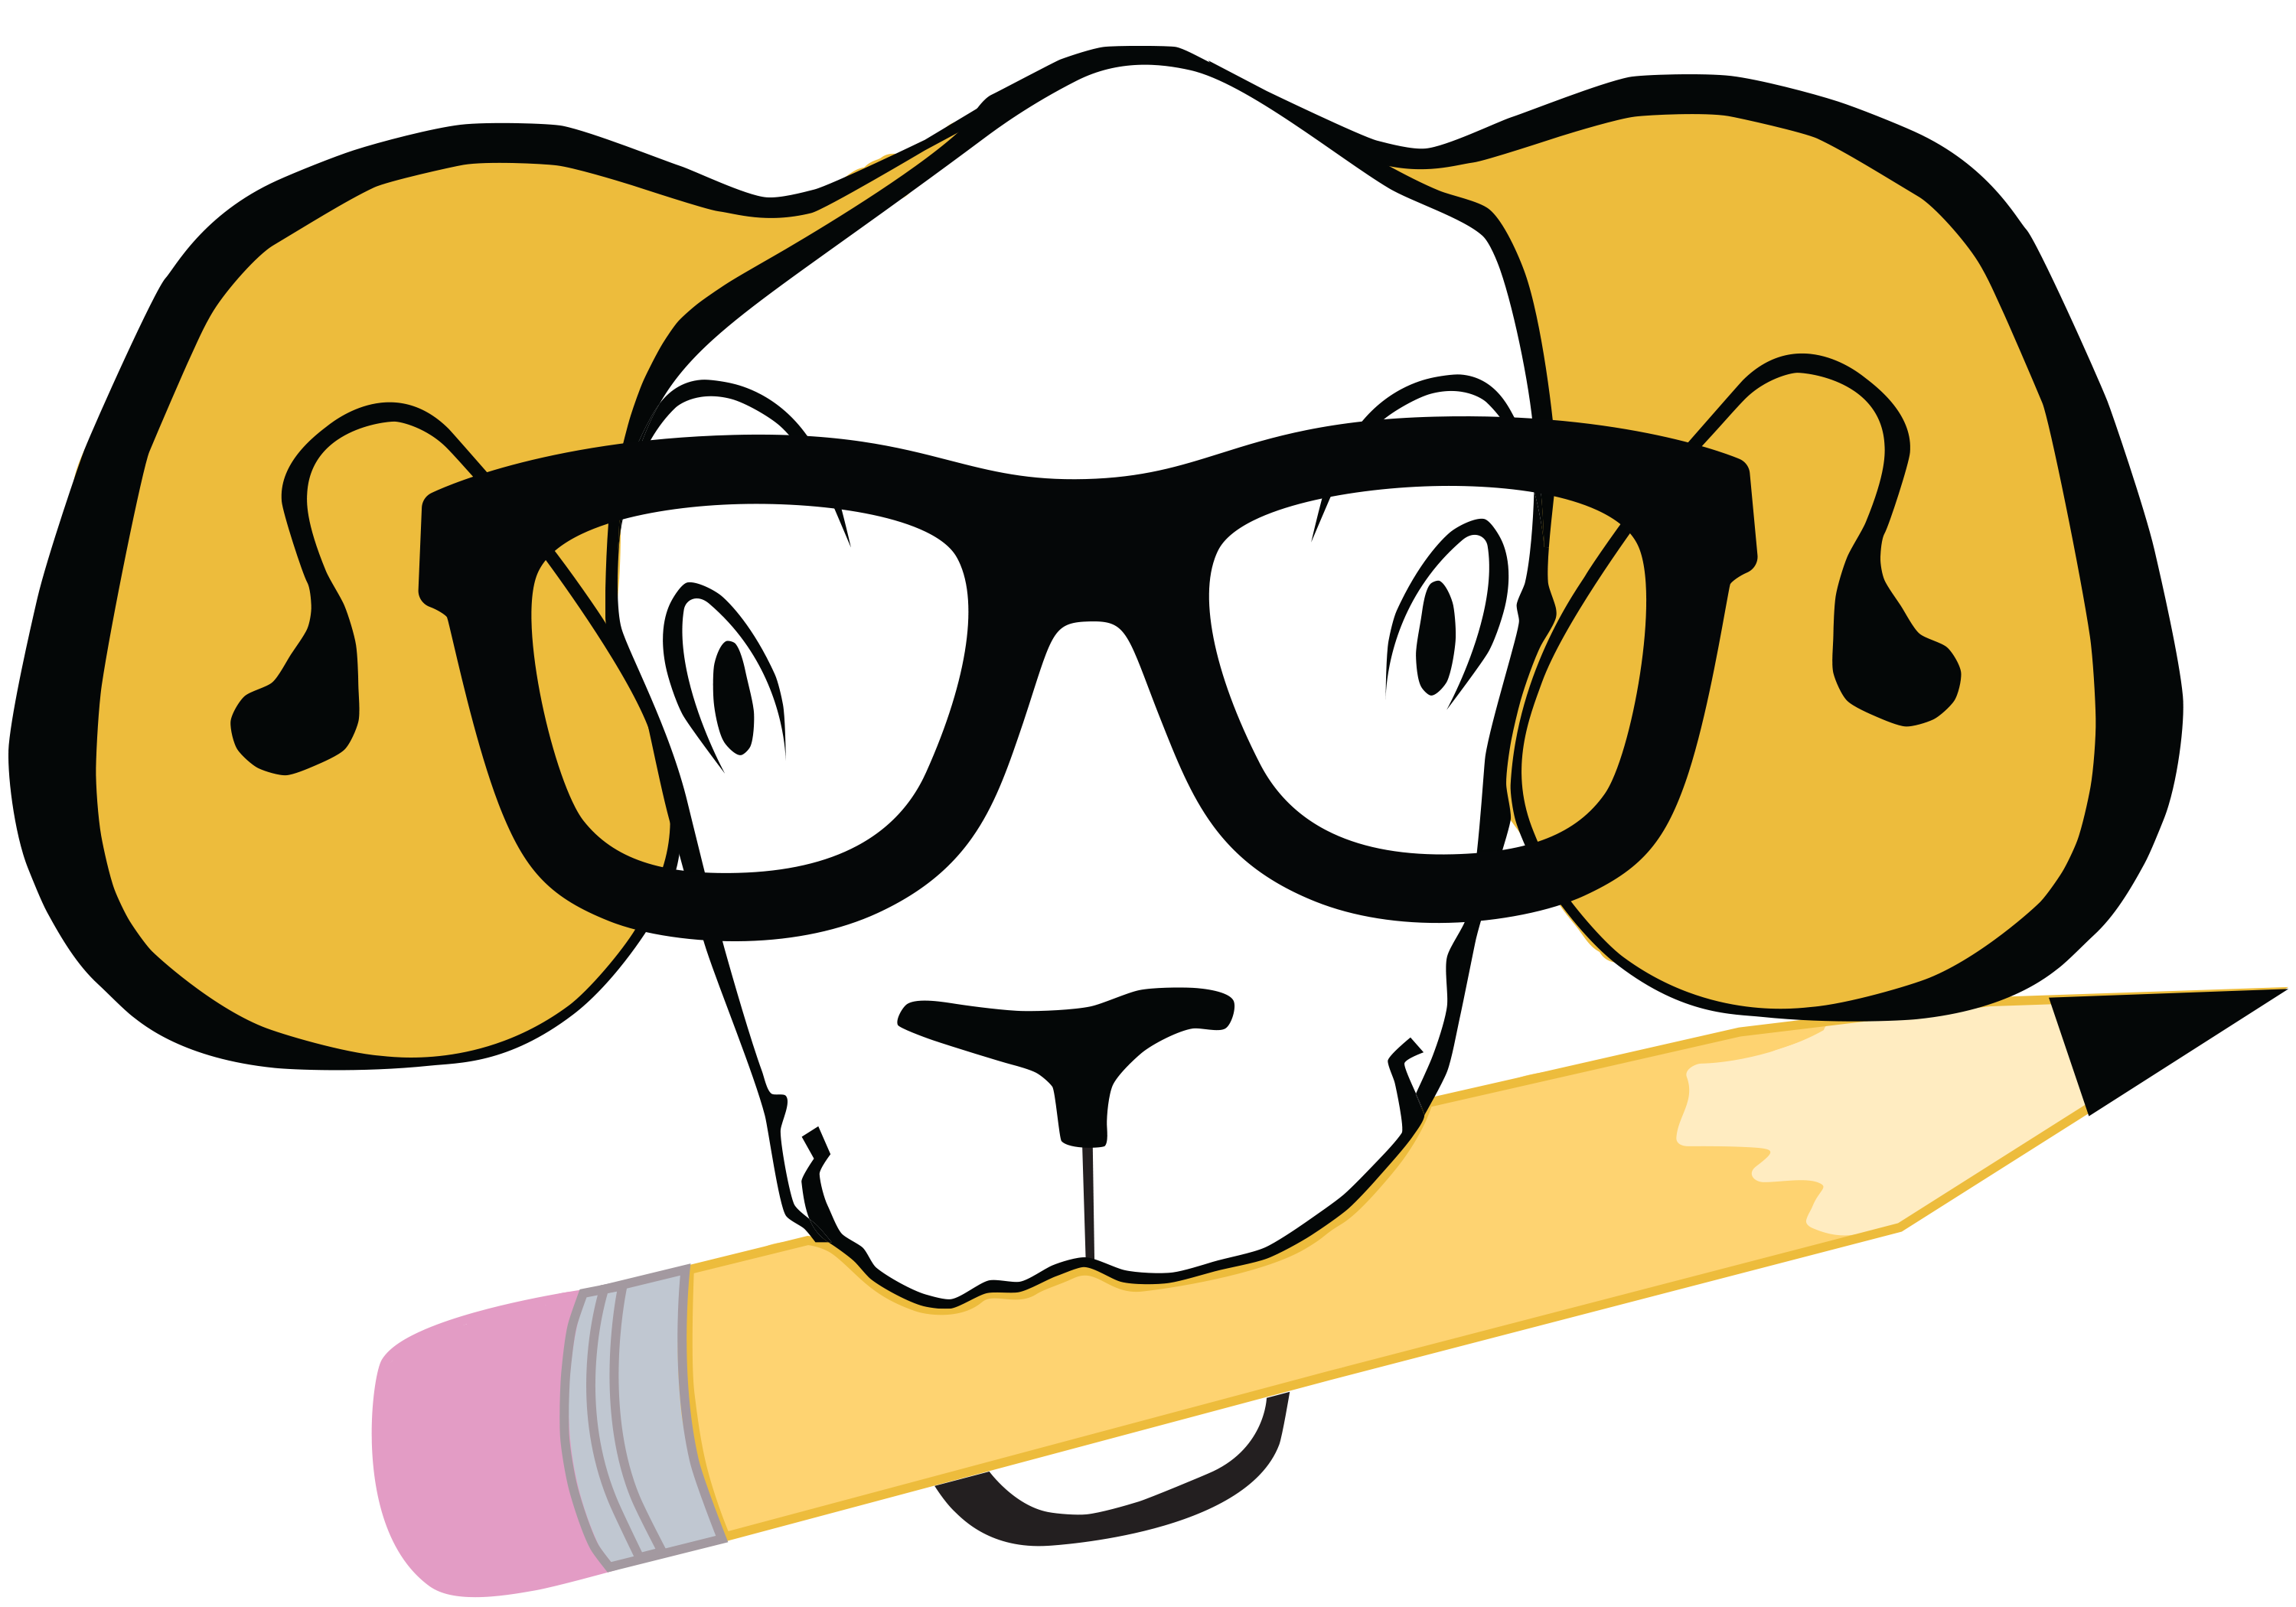 A cartoon ram holding a pencil in its mouth.